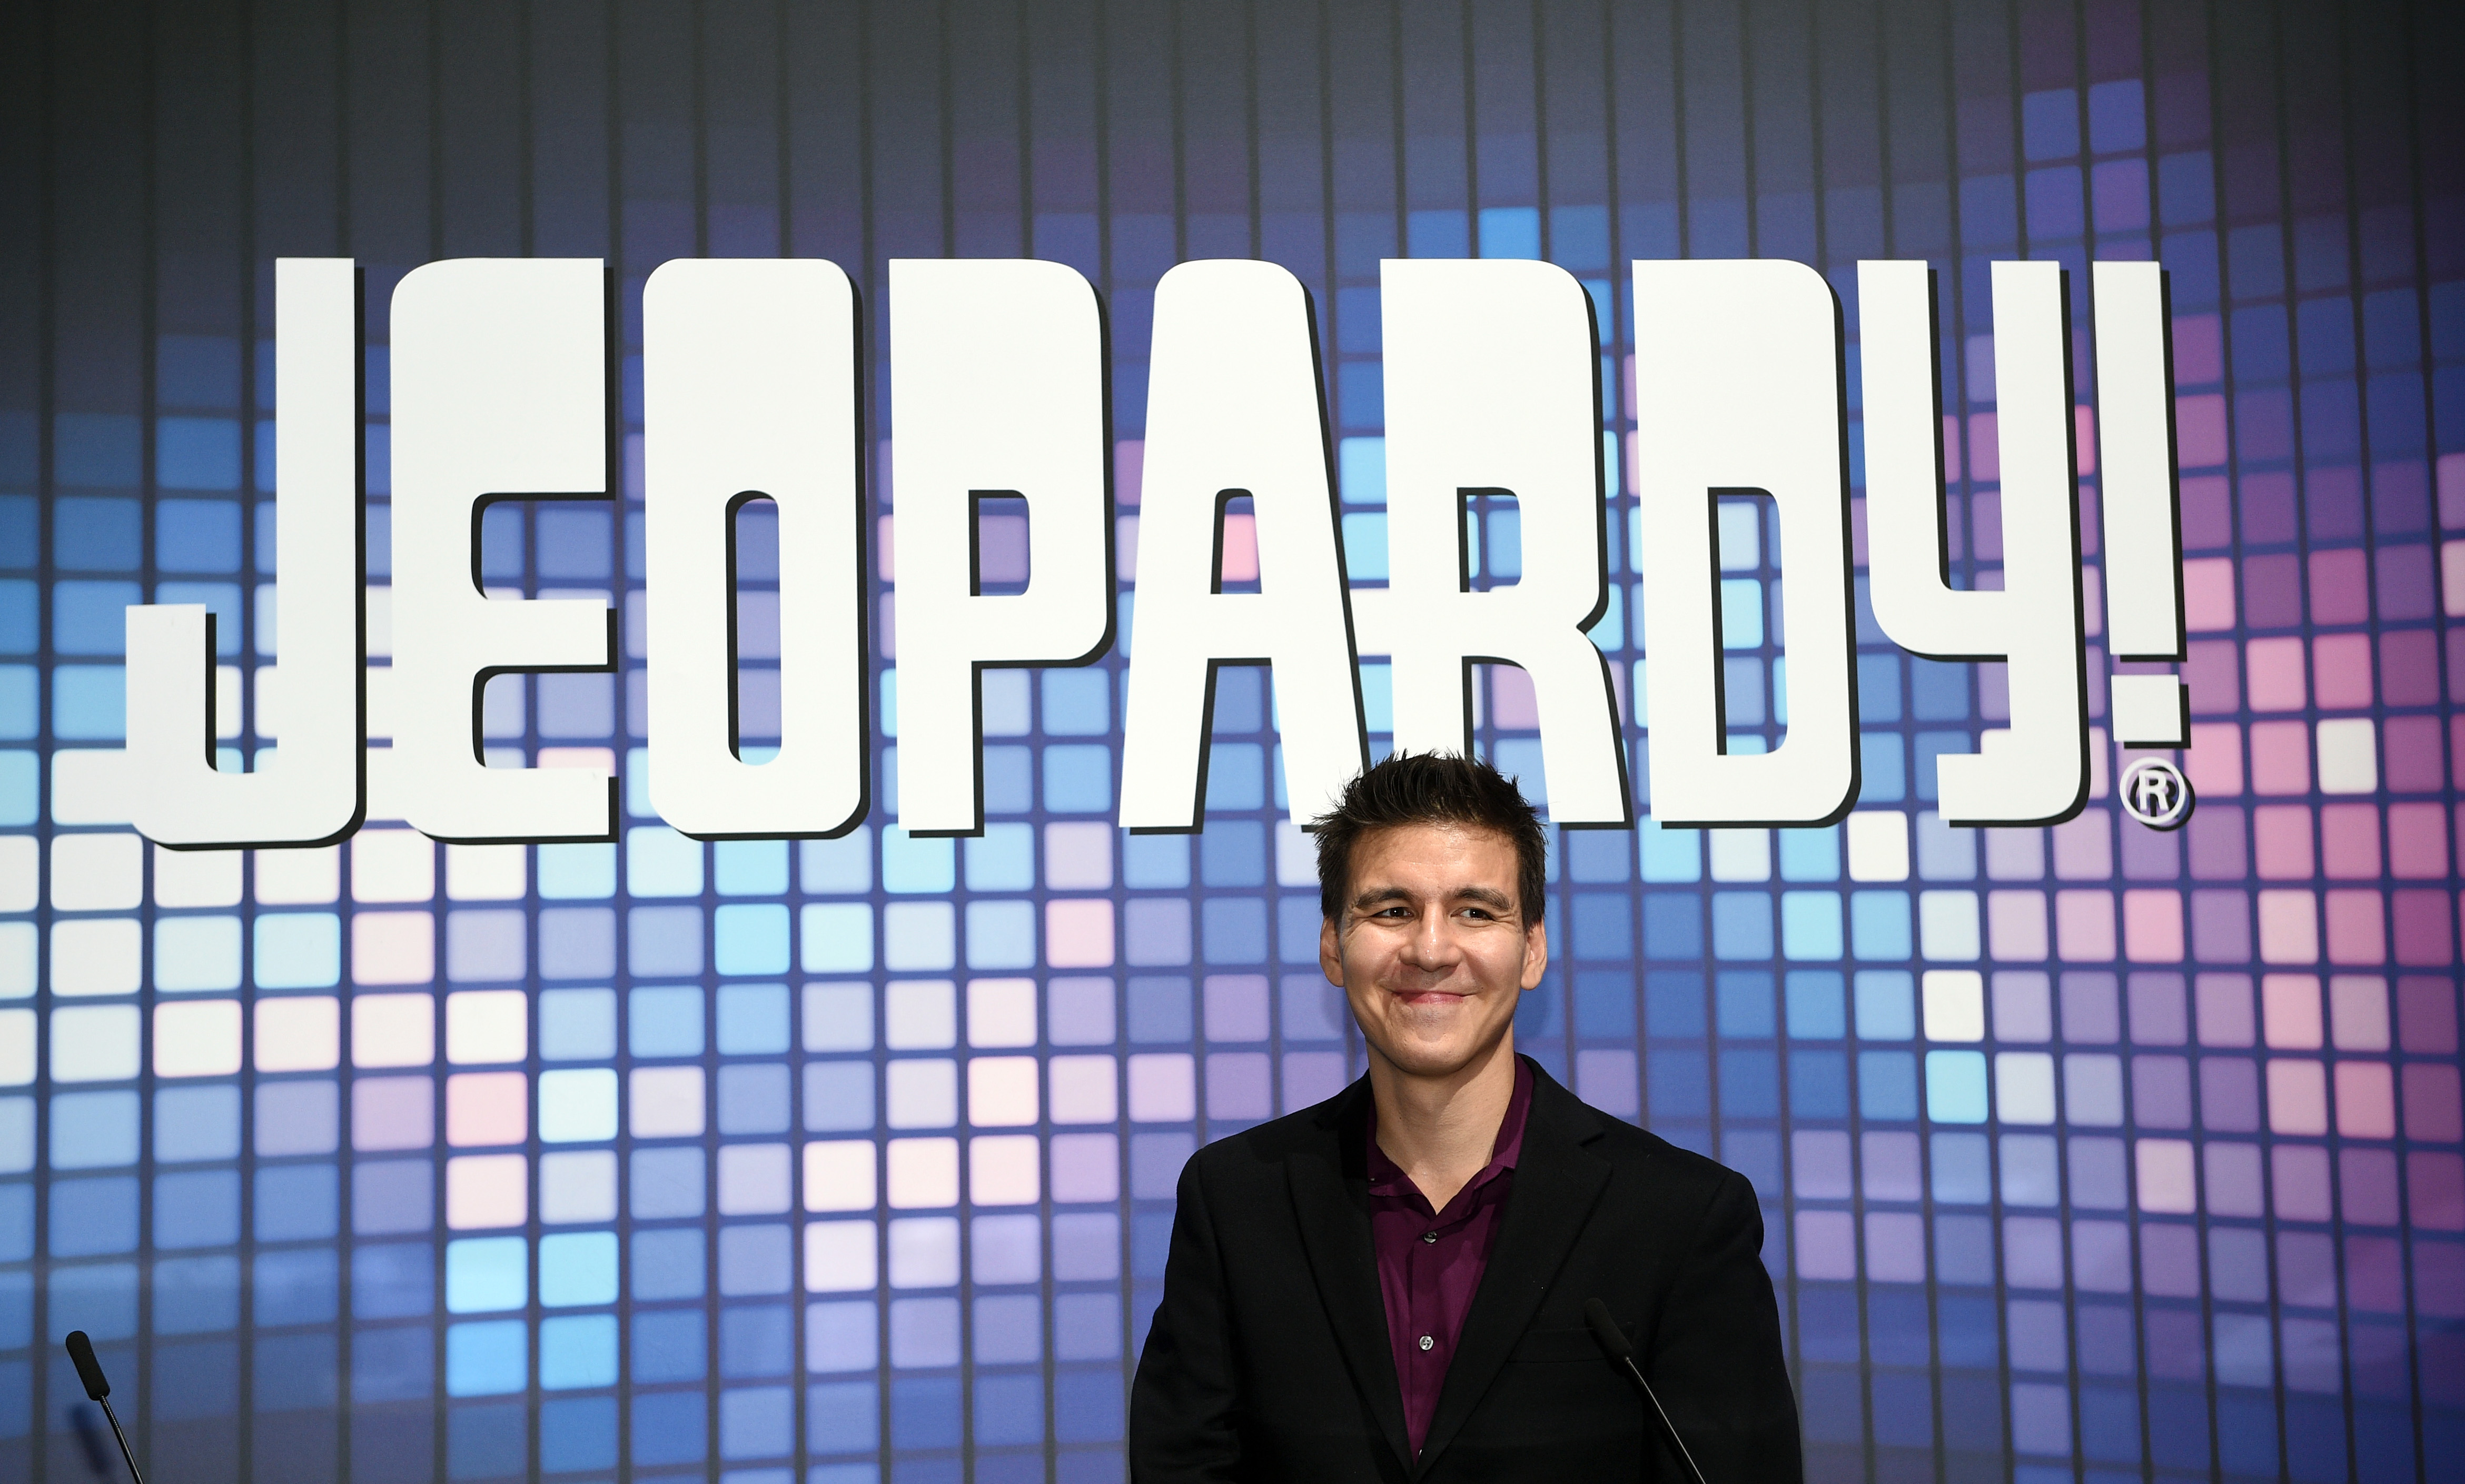 'Jeopardy!' champion James Holzhauer poses at the IGT booth during the trade show debut of two "Jeopardy!"-themed IGT slot machines during the Global Gaming Expo (G2E) at the Sands Expo and Convention Center 